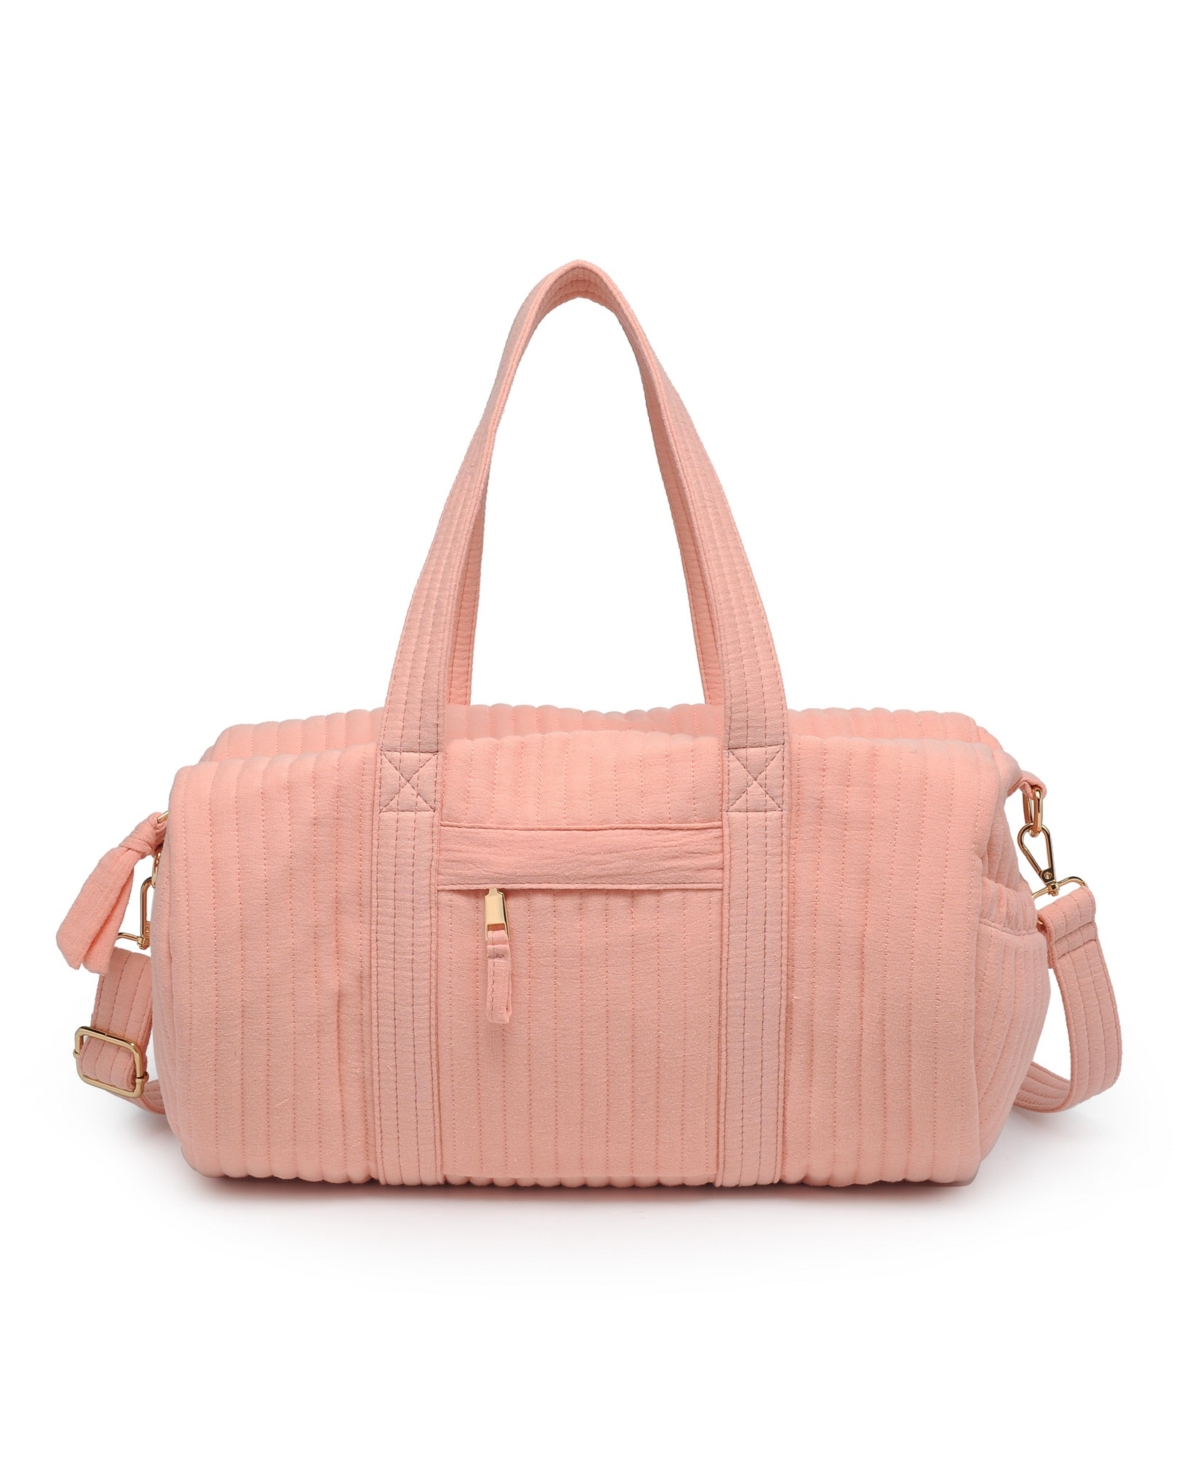 Urban Expressions Terry Duffel Bag In Rose